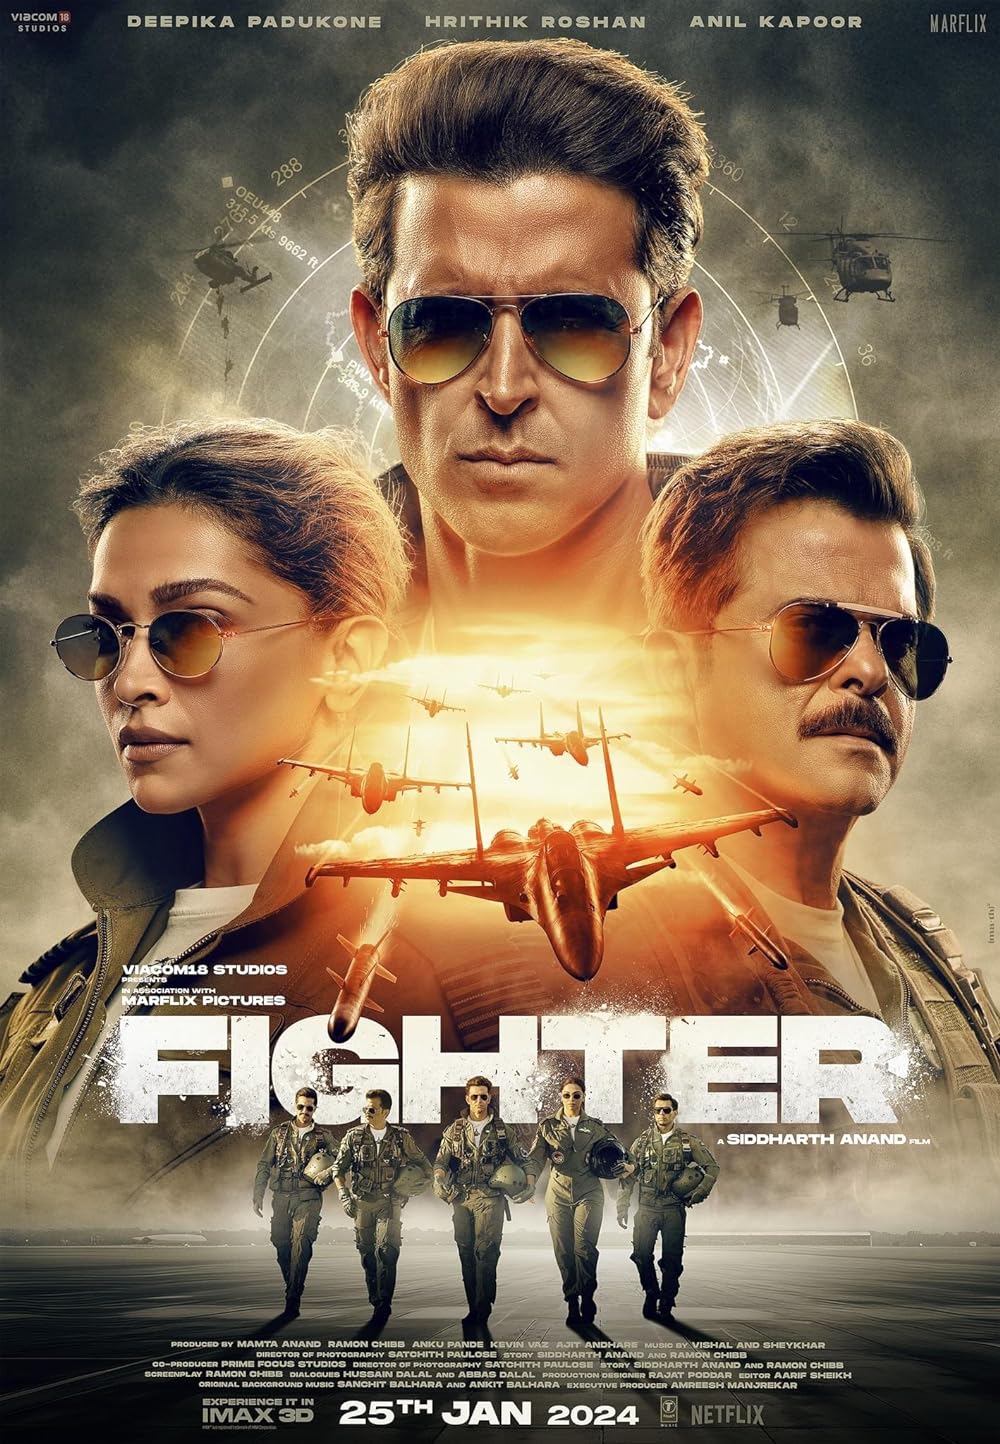 Fighter  (March 21)  - NetflixFighter follows the journey of Shamsher Pathania, who joins the Indian Air Force, undertaking the quest to transform into a genuine hero in service of his nation. Starring Hrithik Roshan and Deepika Padukone in the lead roles, the film also features Anil Kapoor, Karan Singh Grover, and Akshay Oberoi in pivotal roles. 